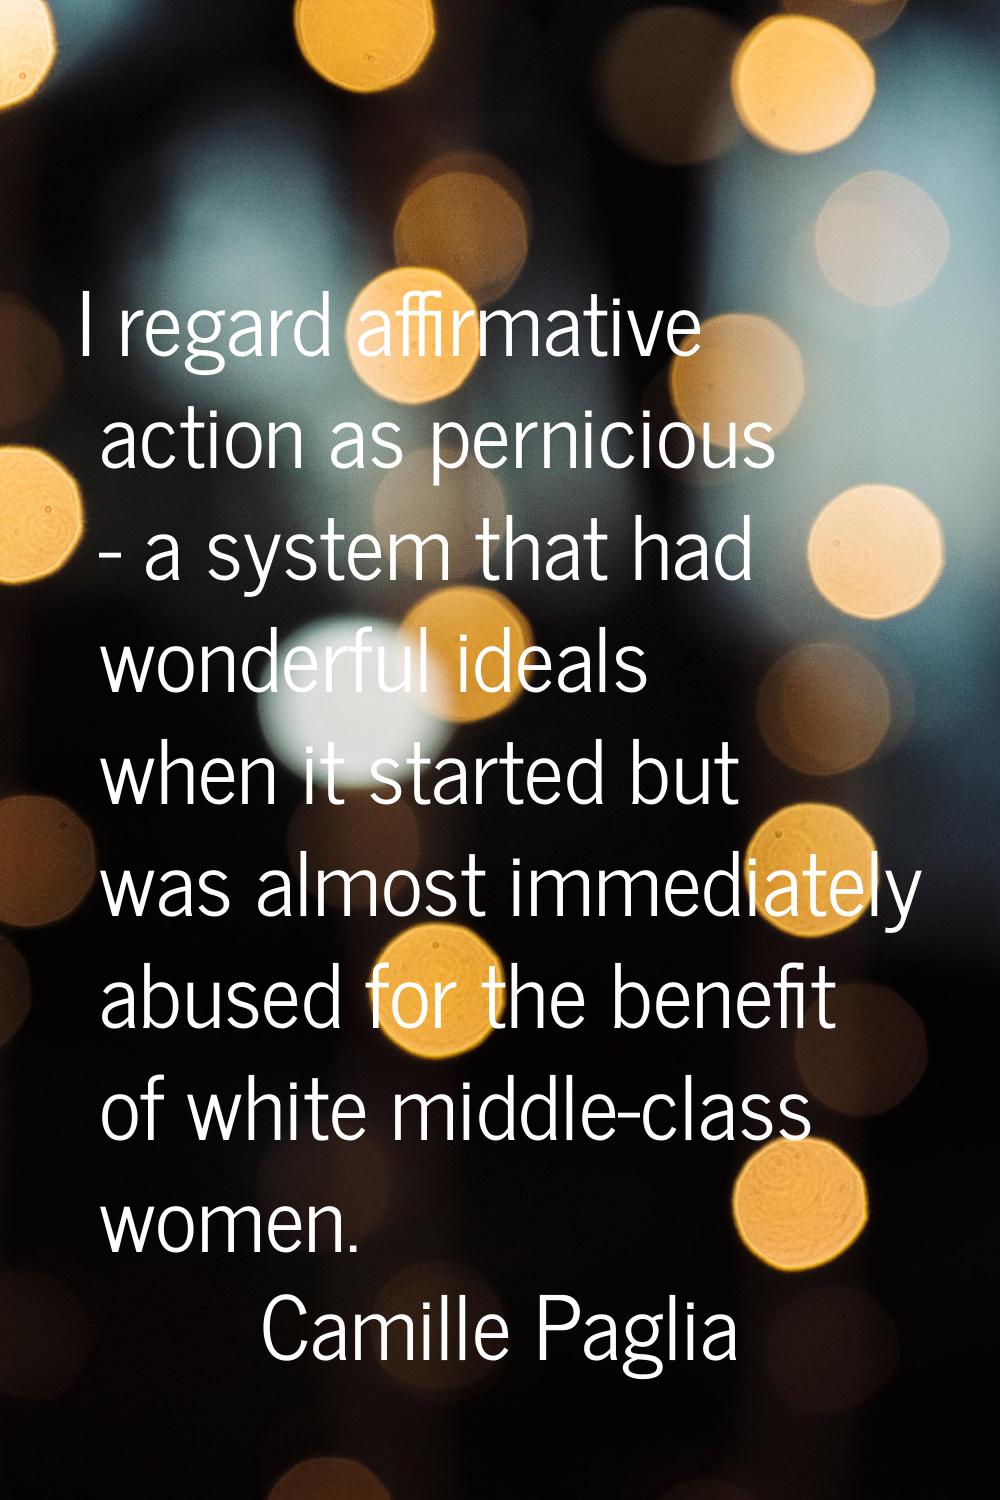 I regard affirmative action as pernicious - a system that had wonderful ideals when it started but 